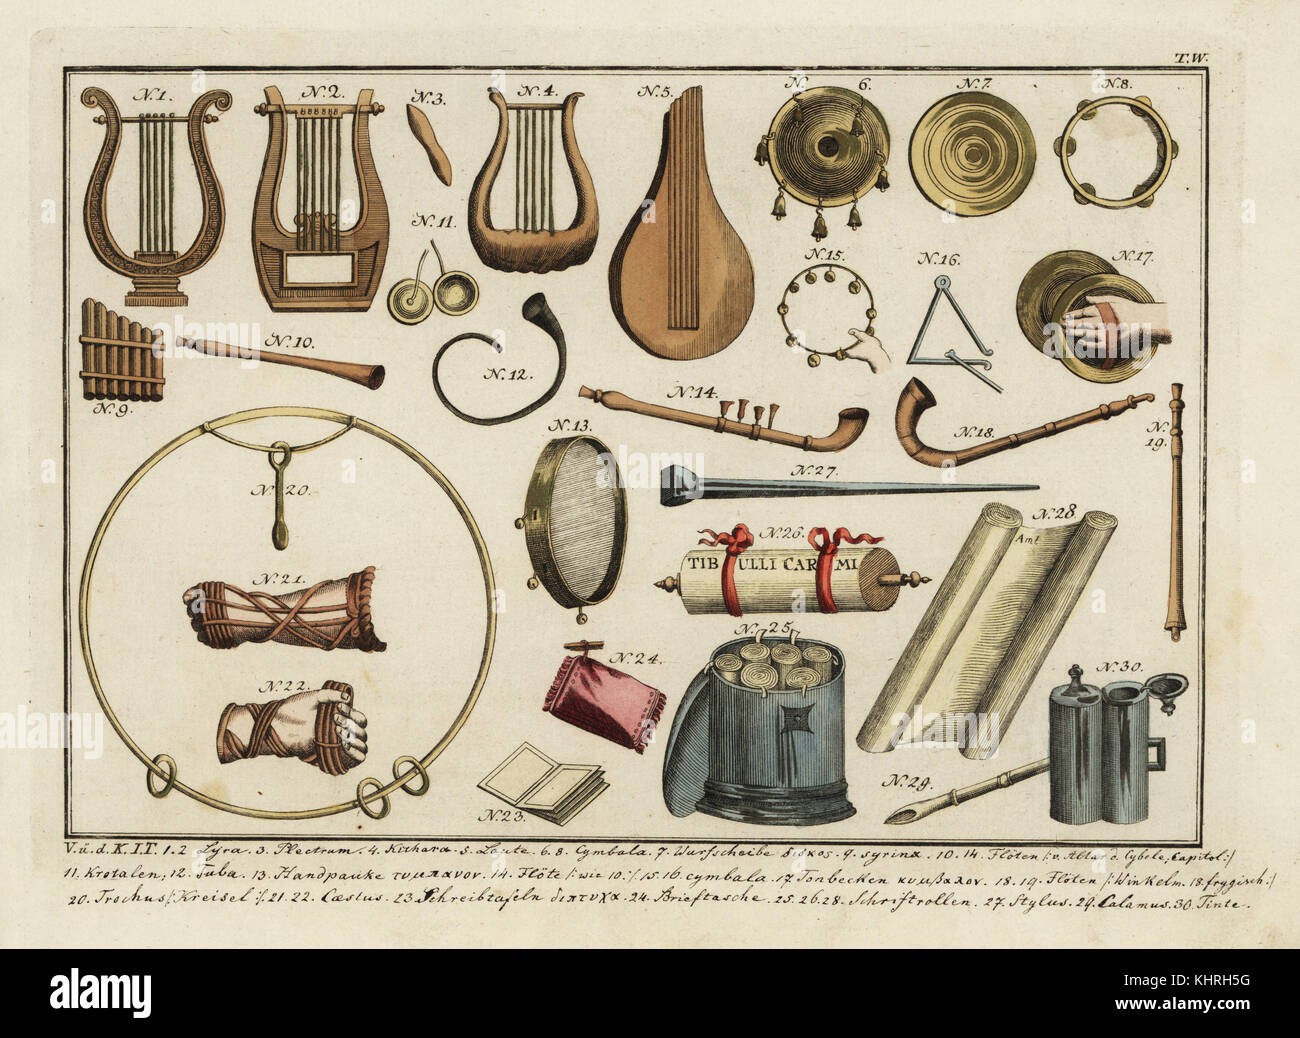 Classical musical instruments: lyres 1,2, plectrum 3, cithara 4, lute 5, percussion instruments 6,7,8,15, pan pipes 9, crotales 11, tuba 12, flutes 10,14,18,19, triangle 16, cymbals 17, trochus or metal hoop 20, caestus or boxing gloves 21,22, writing paper 23, wallet 24, scrolls 25,26,27, stylus or pen 28, calamus or quill 29, and inkwell 30. Handcoloured copperplate engraving from Robert von Spalart's Historical Picture of the Costumes of the Principal People of Antiquity and of the Middle Ages, Chez Collignon, Metz, 1810. Stock Photo